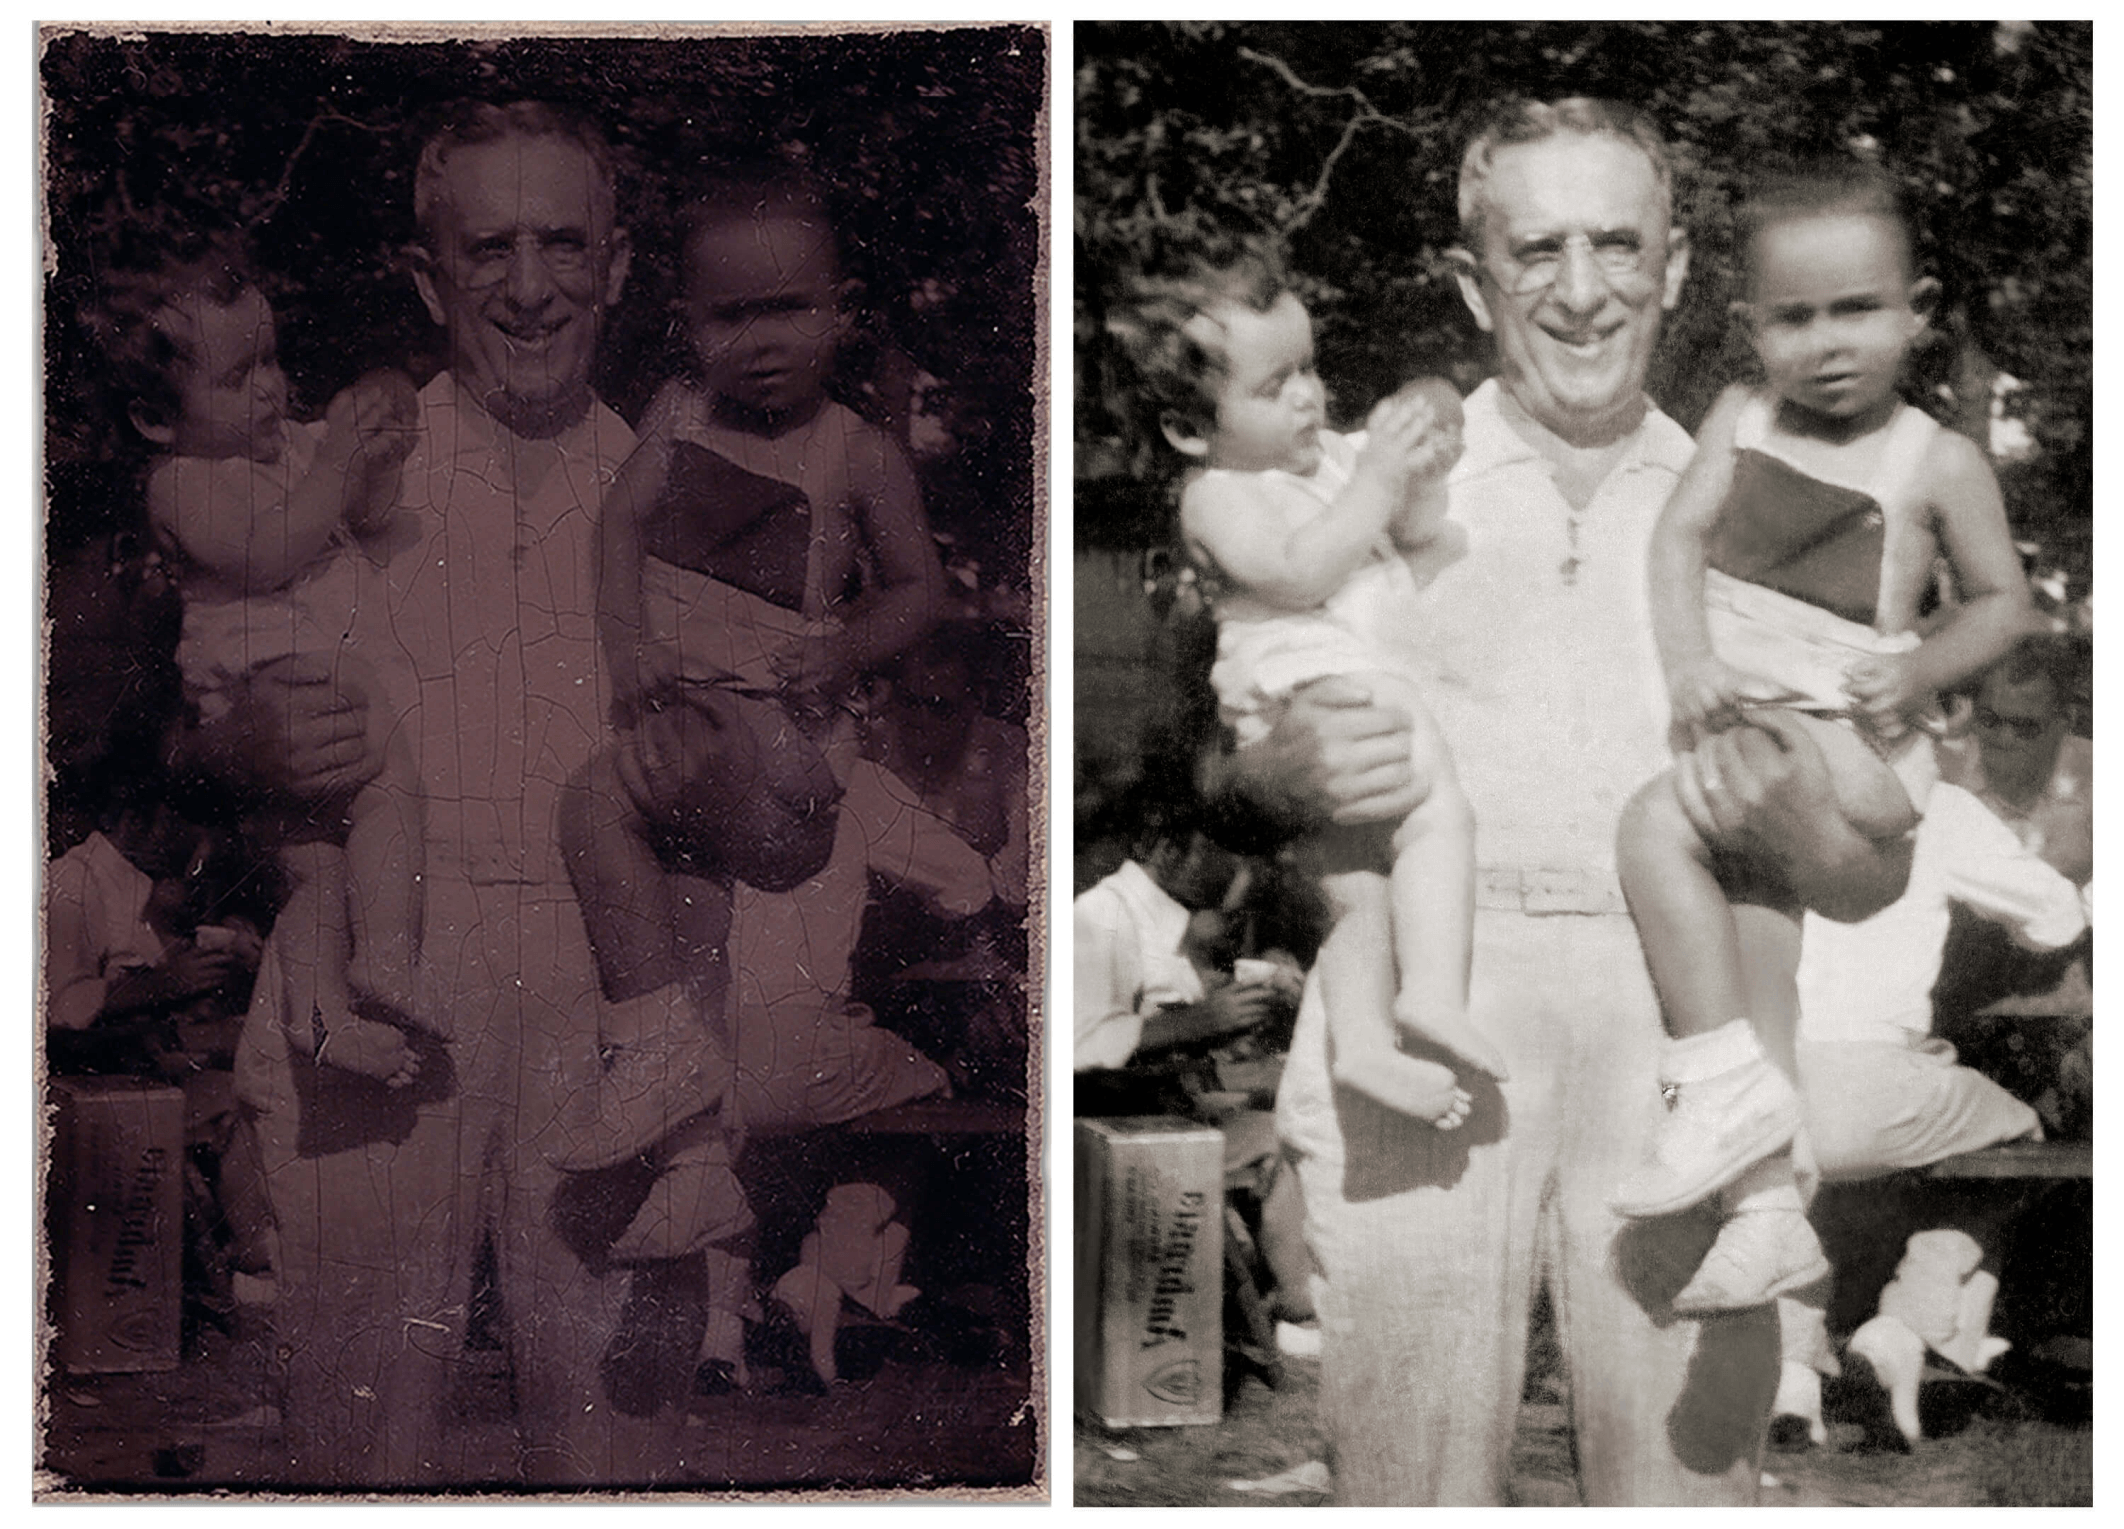 A Collage of Restored Image of A Man Holding Two Kids